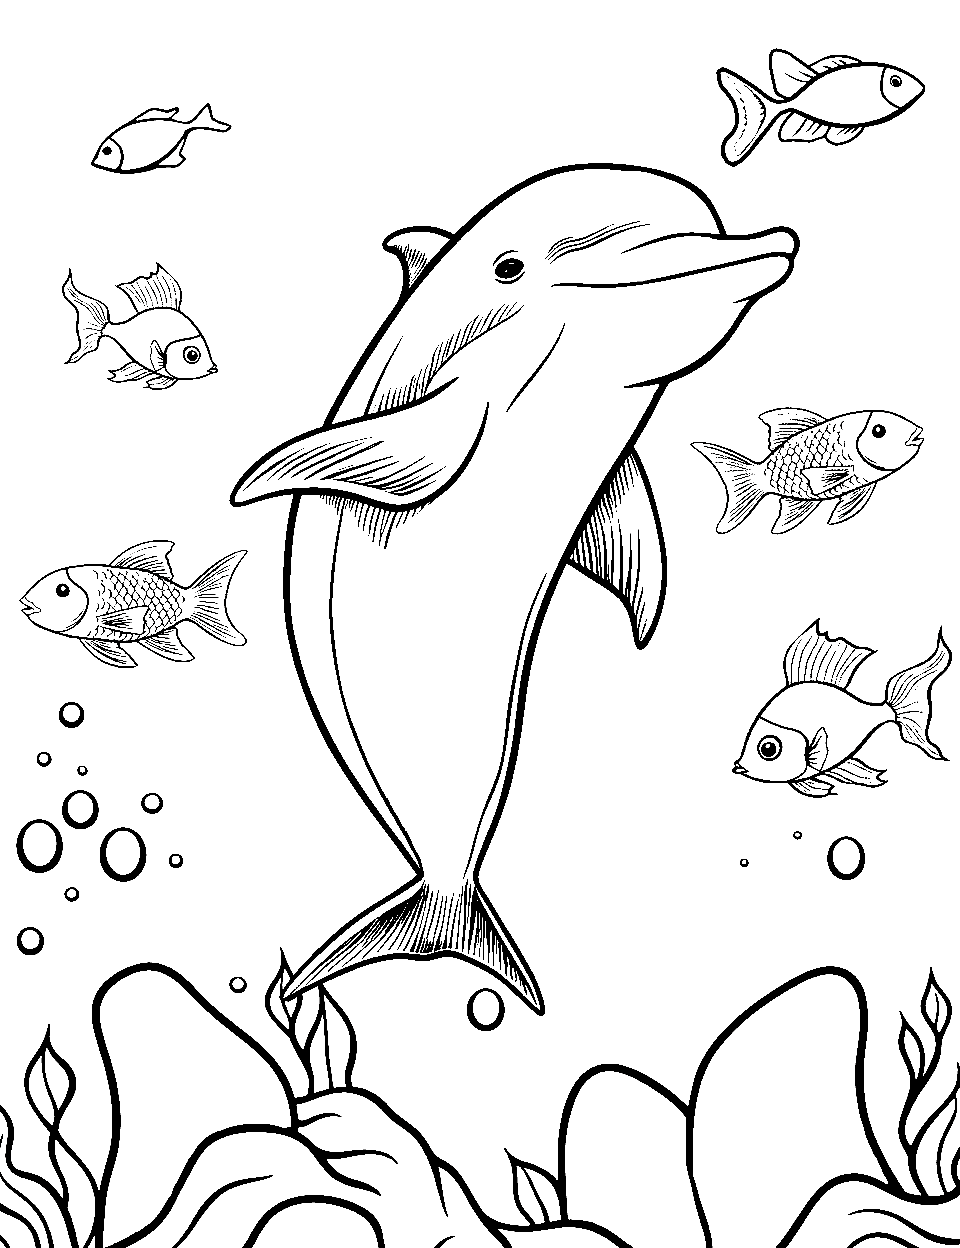 Dolphin Amidst Fishes Coloring Page - A joyful dolphin navigating through a path with fish around on the ocean floor.